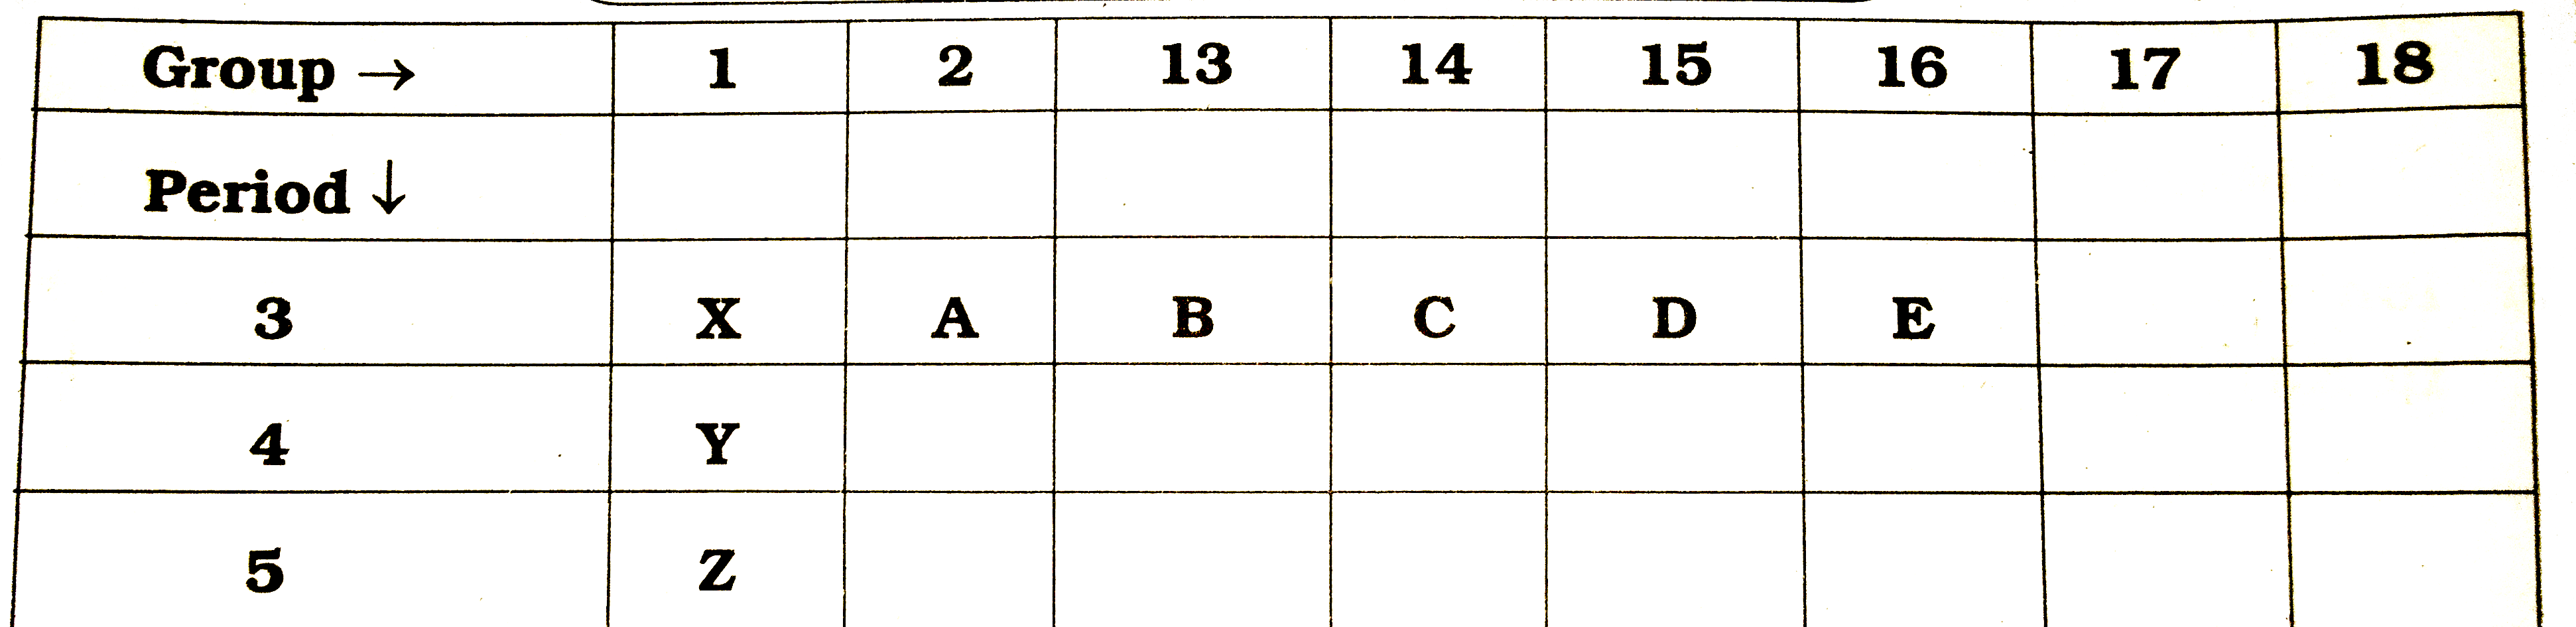 Refer  the above  part  periodic  table  and  answer  the  following  questions      Which  element  has  least  I.P.E  value ?